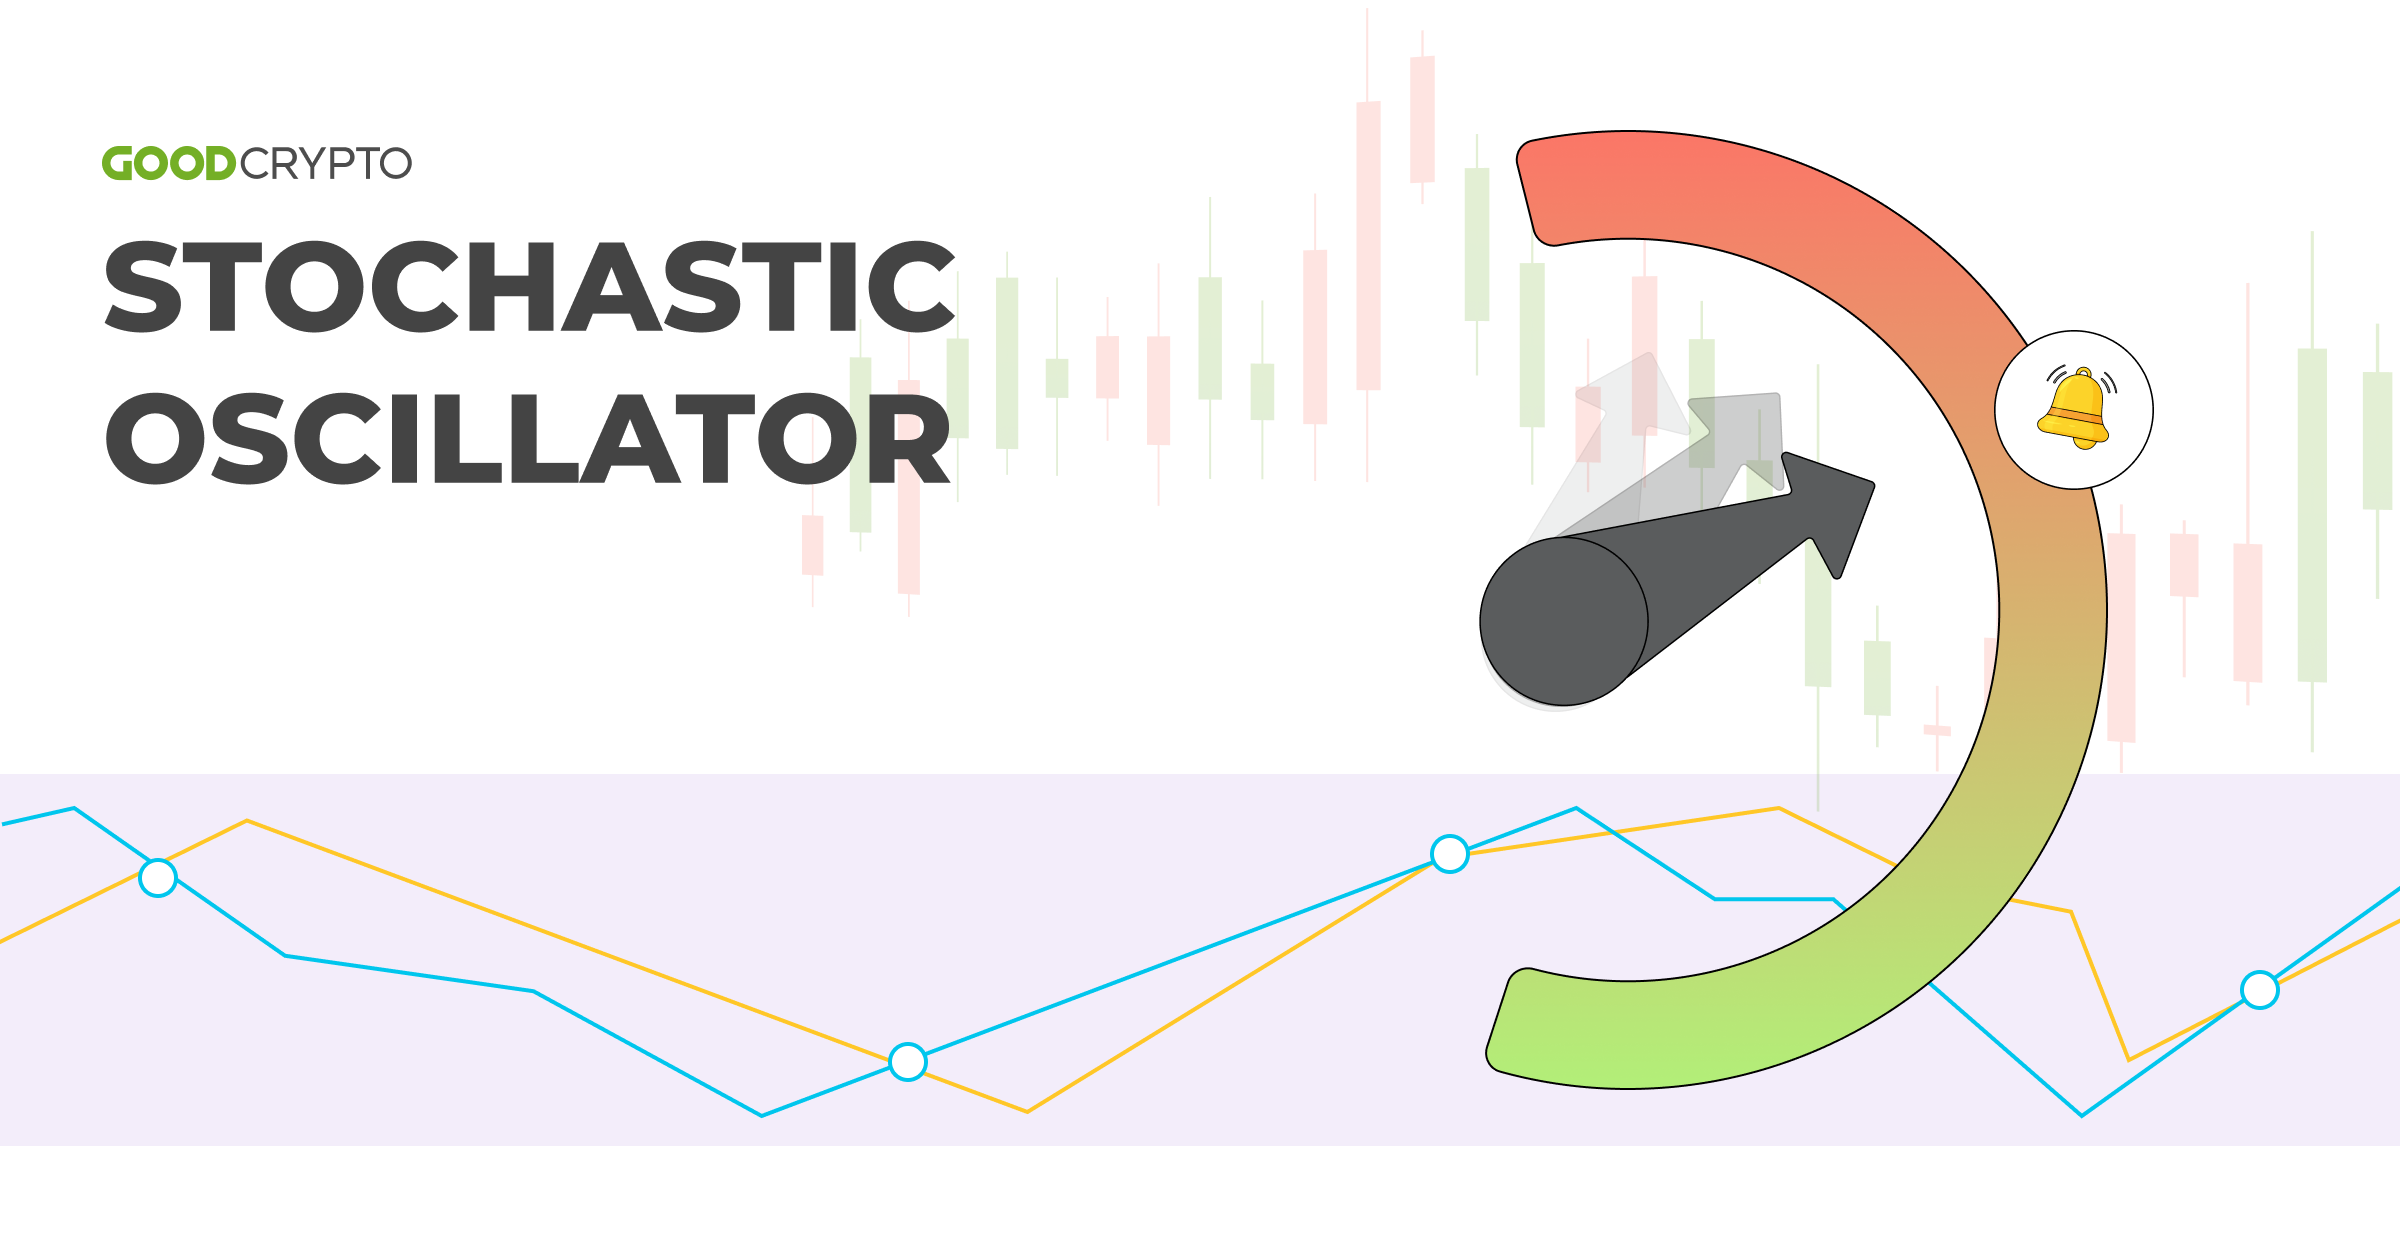 Using Stochastic and Stoch RSI Indicators in Crypto Trading